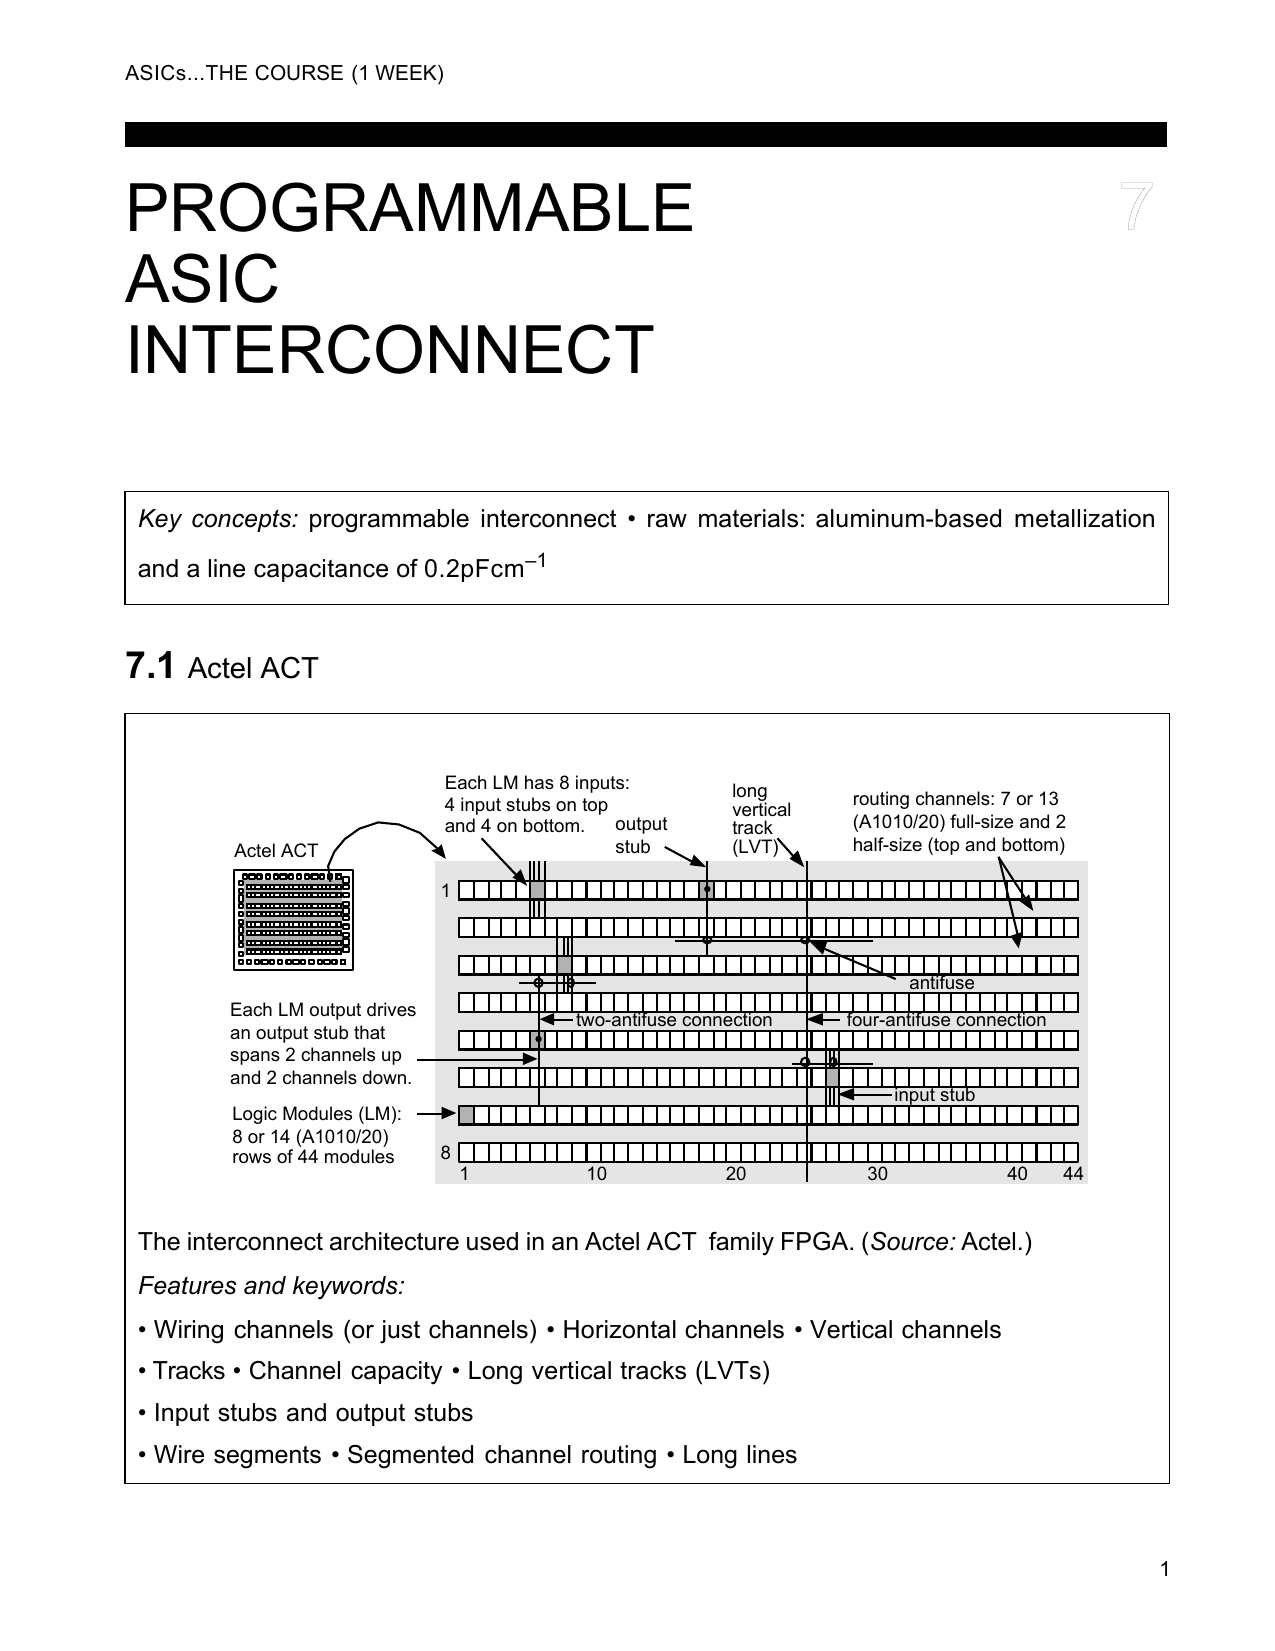 PROGRAMMABLE ASIC INTERCONNECT 7